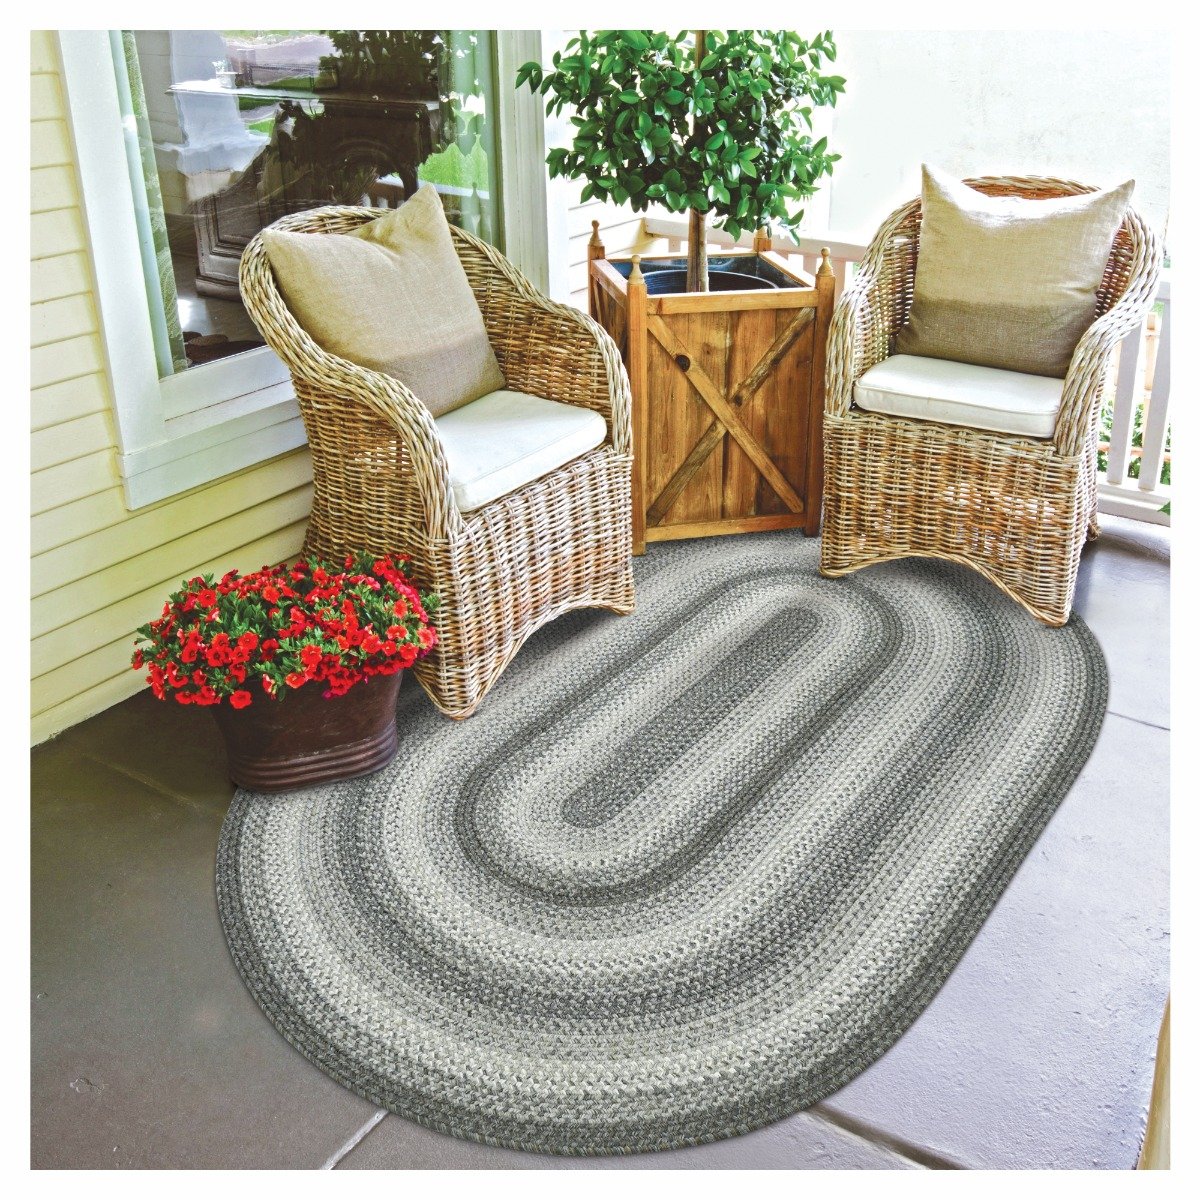 Graphite Grey Oval UD Braided Rugs Washable, Indoor-Outdoor